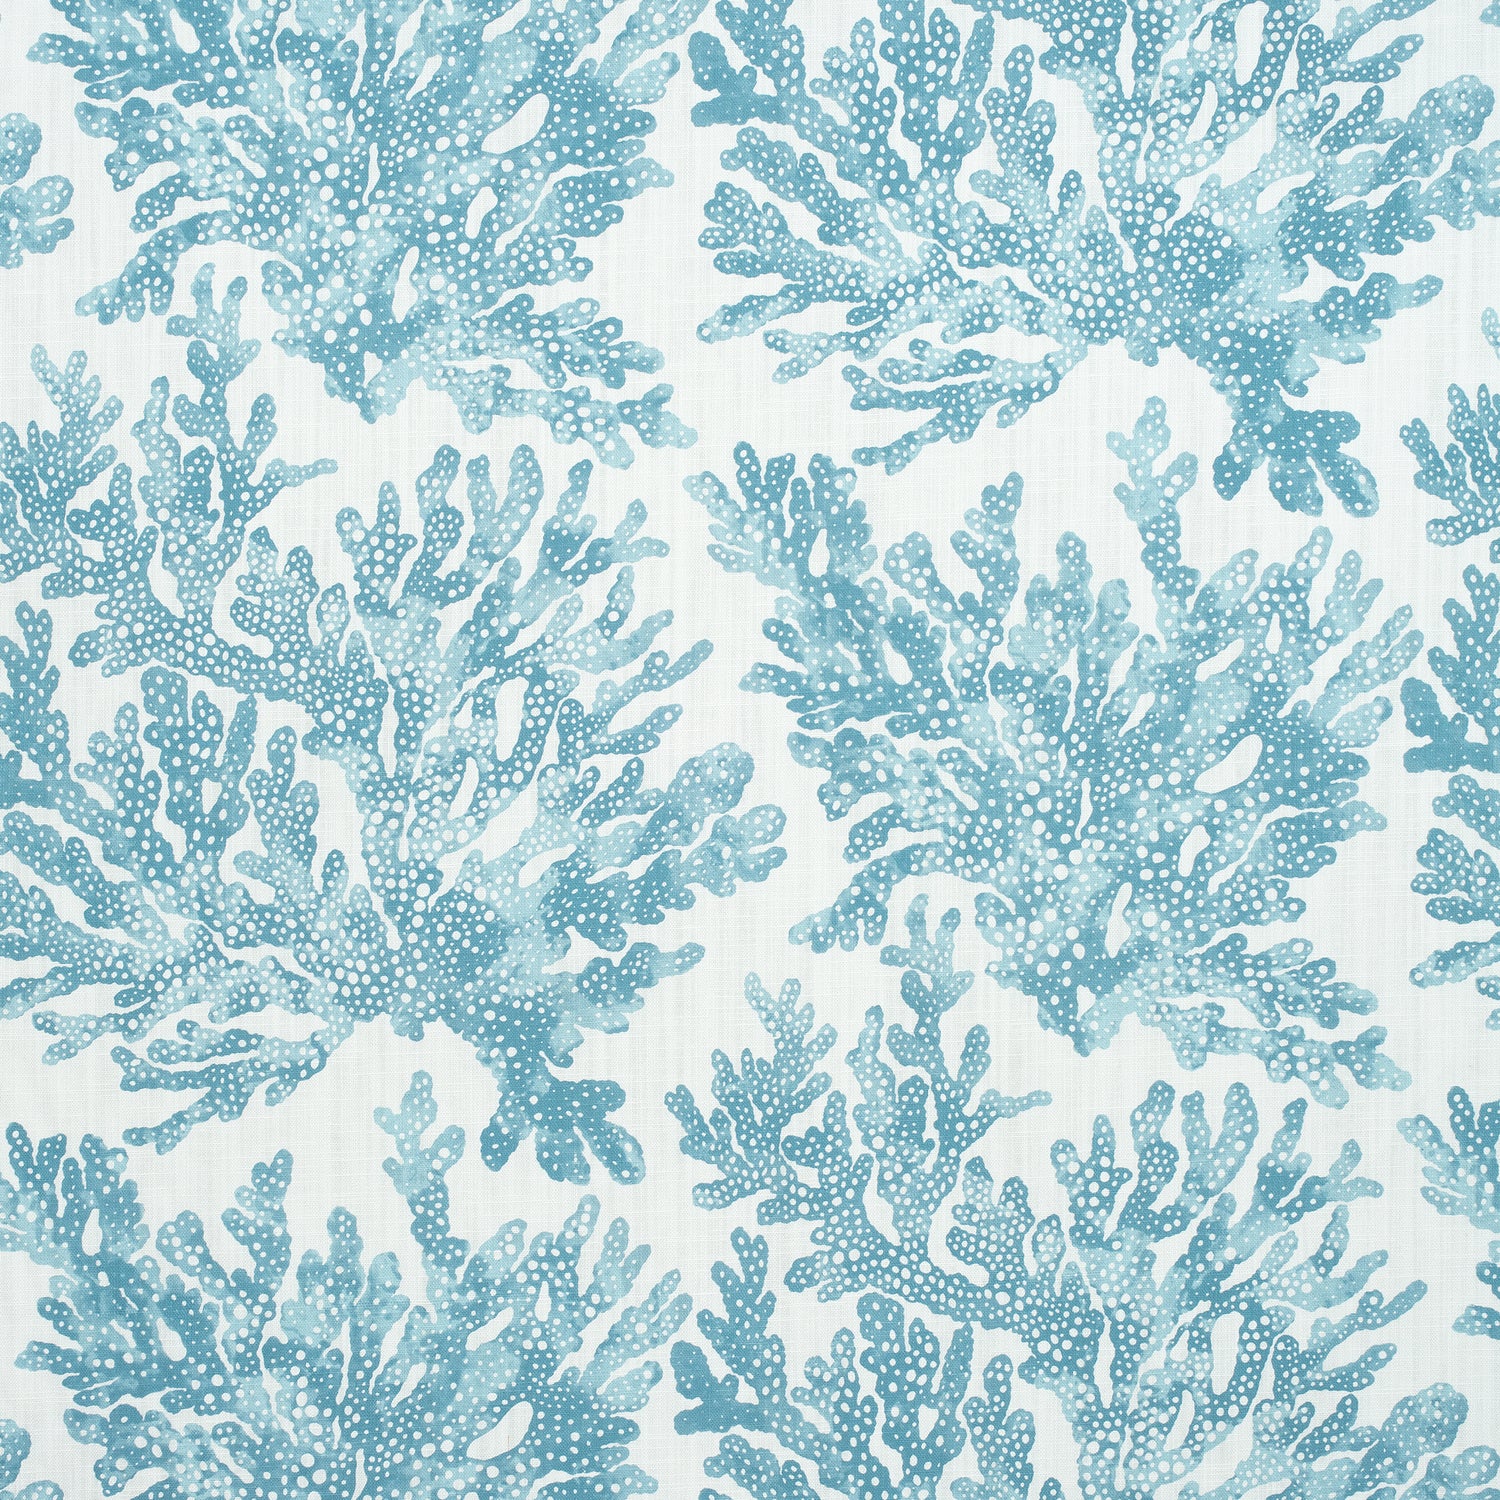 Marine Coral fabric in spa blue color - pattern number F910122 - by Thibaut in the Tropics collection